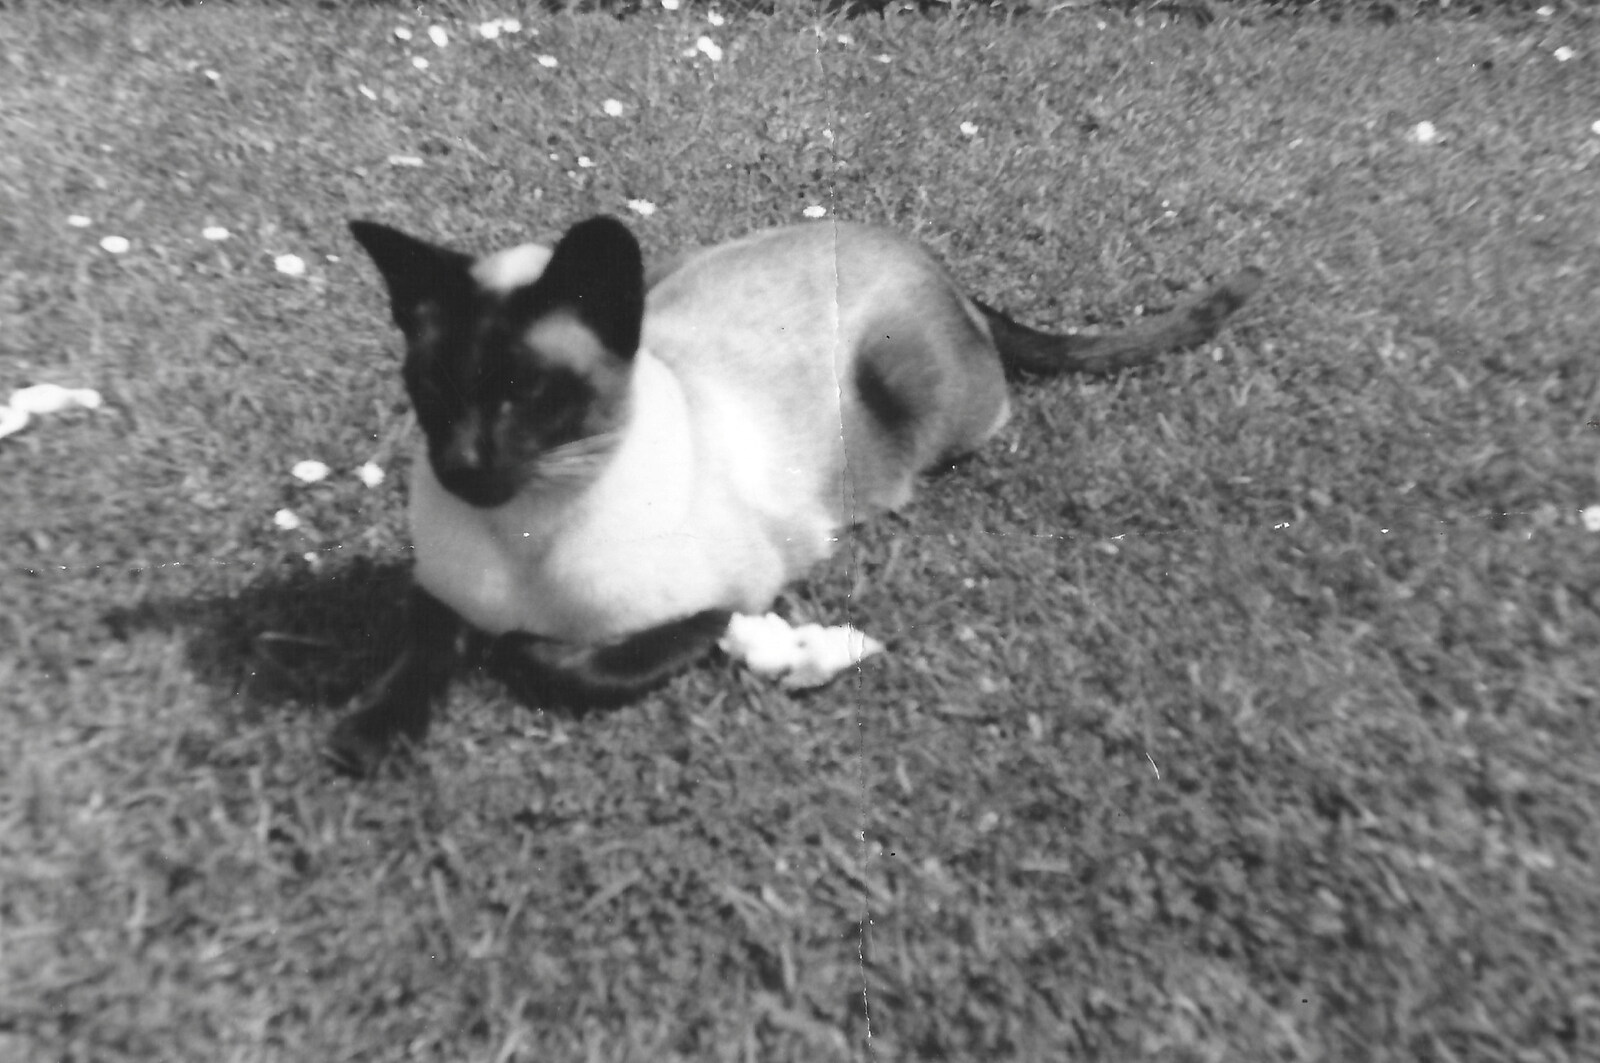 Rupert the cat from Family History: Raven Road, Timperley, Altrincham - 24th January 2020